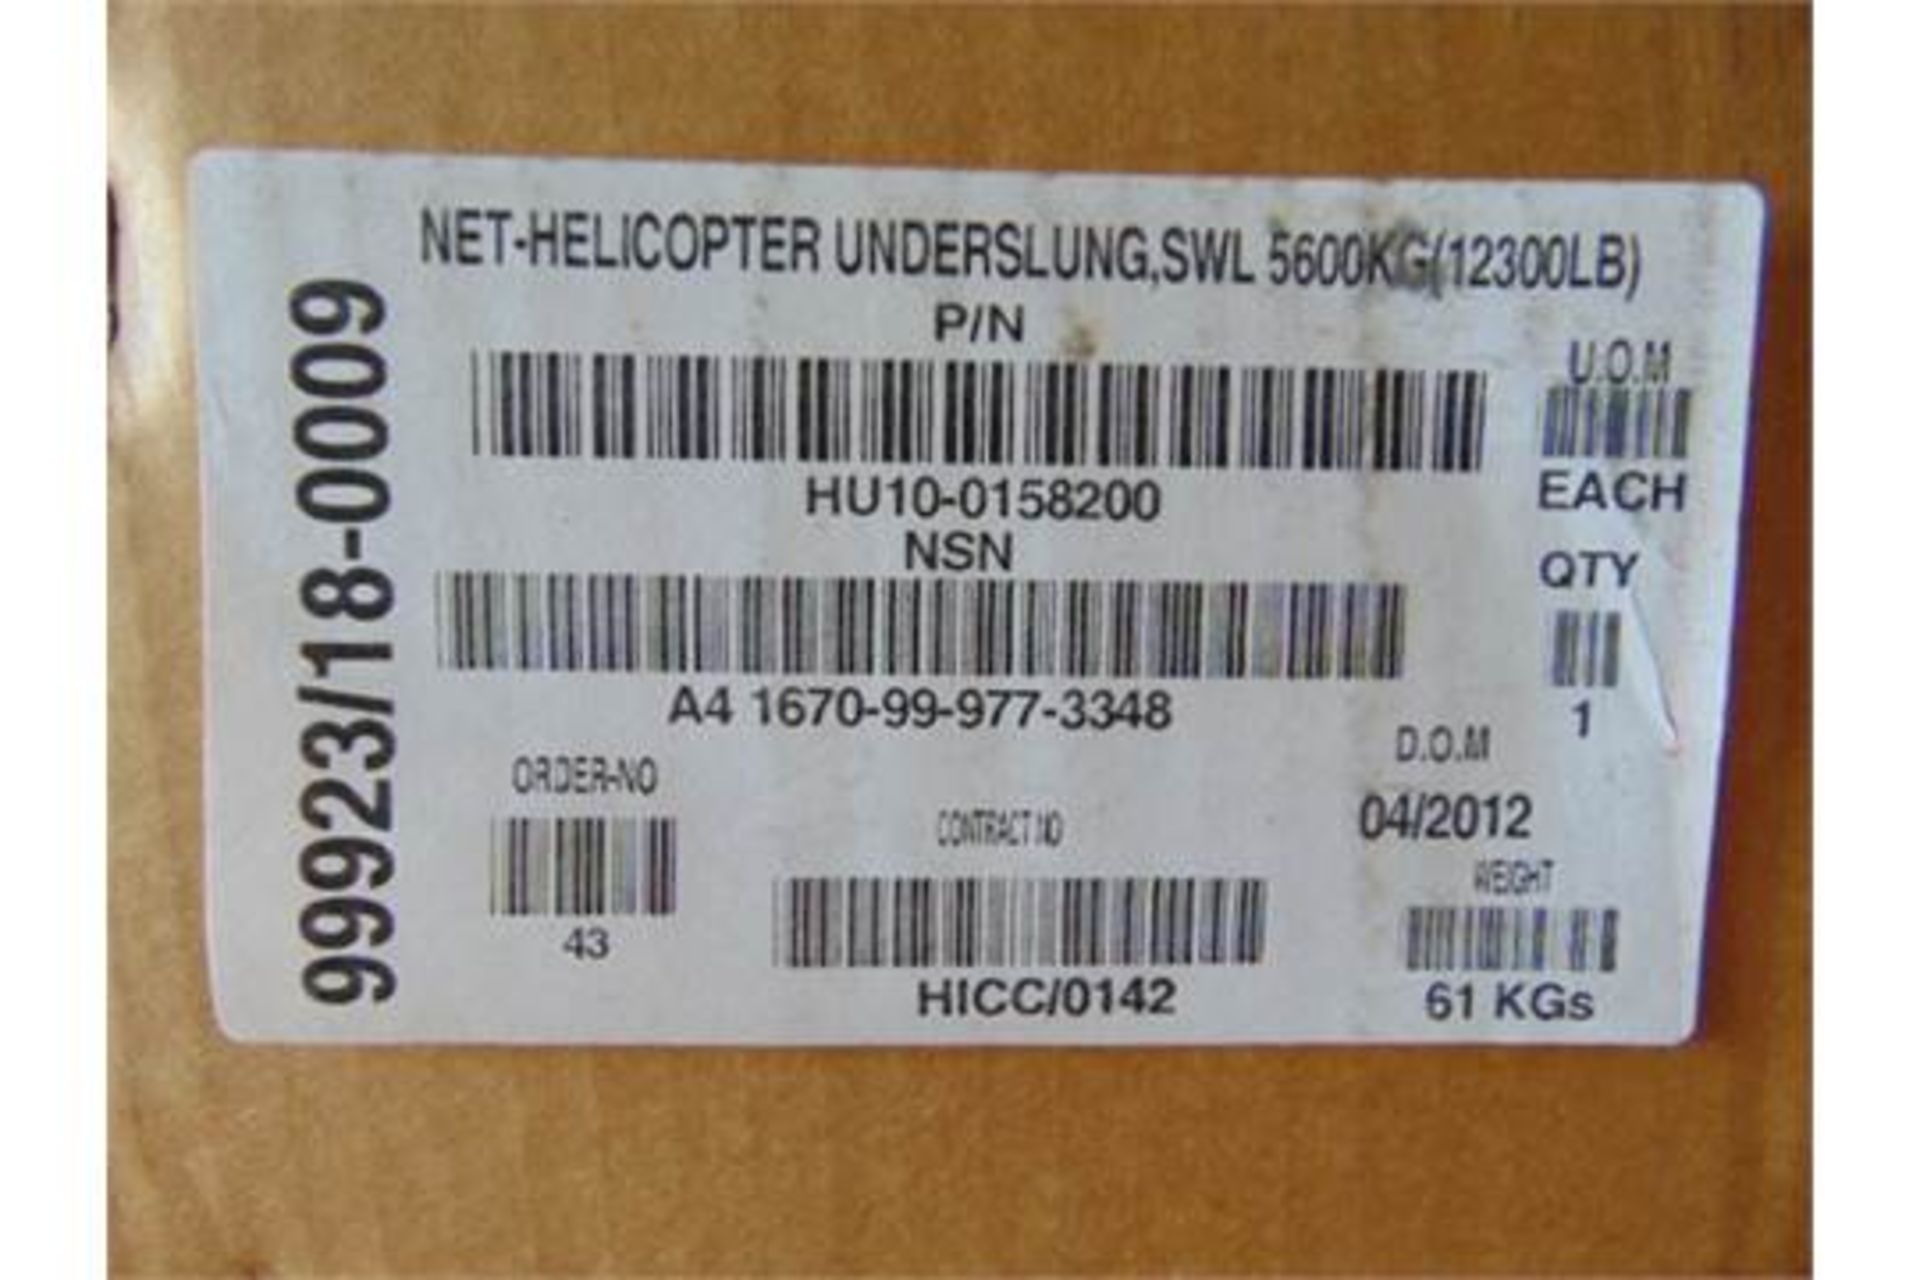 5600Kg Helicopter Cargo Net - Image 12 of 12